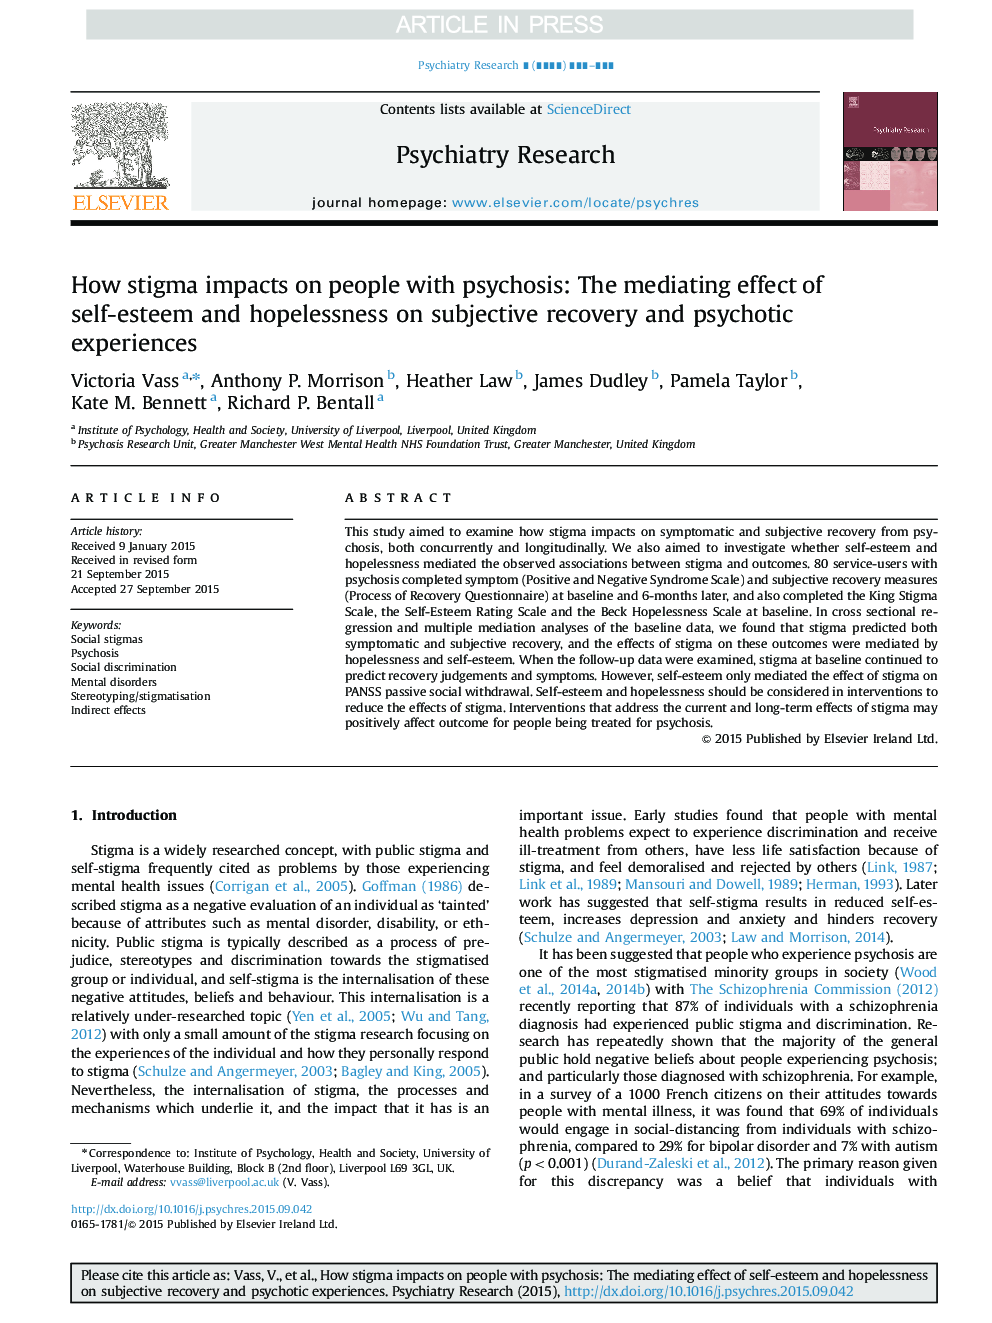 How stigma impacts on people with psychosis: The mediating effect of self-esteem and hopelessness on subjective recovery and psychotic experiences